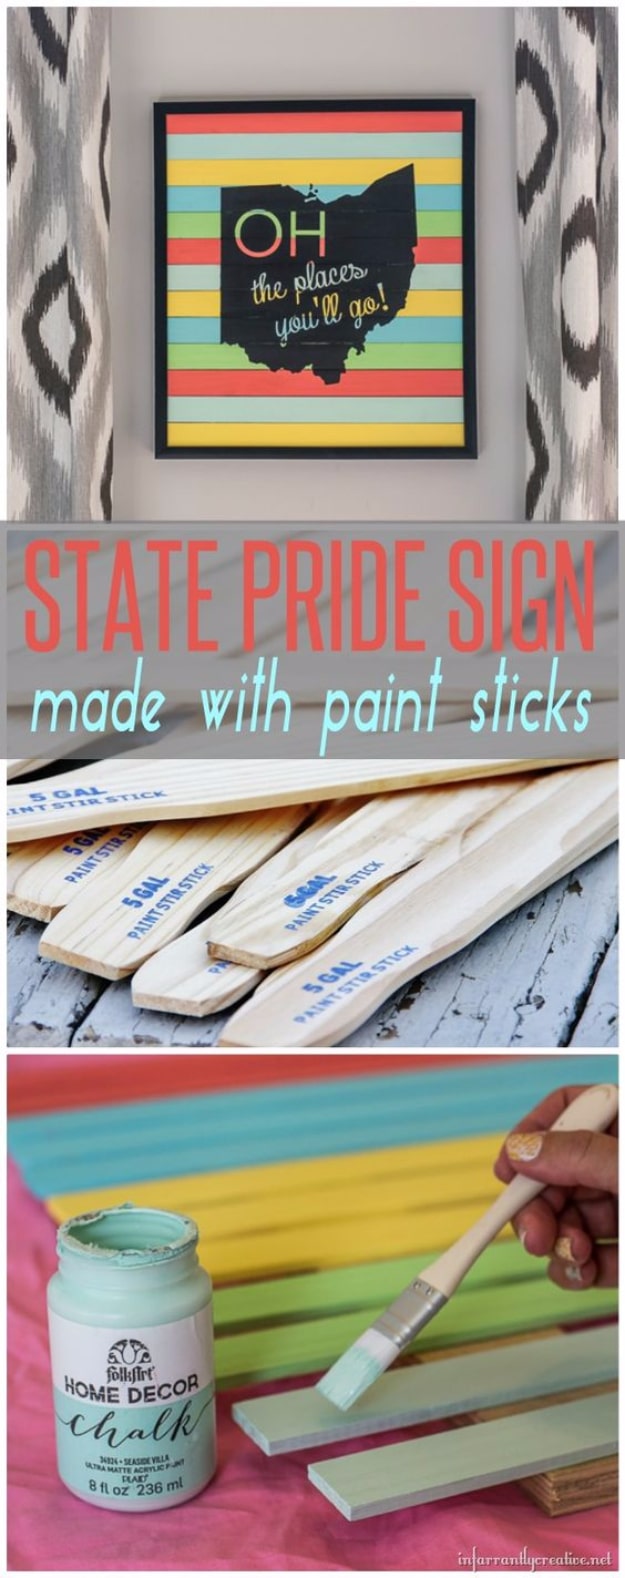 DIY Projects Made With Paint Sticks - DIY Paint Stick State Sign - Best Creative Crafts, Easy DYI Projects You Can Make With Paint Sticks From The Hardware Store - Cool Paint Stick Crafts and Furniture Project Tutorials #diy